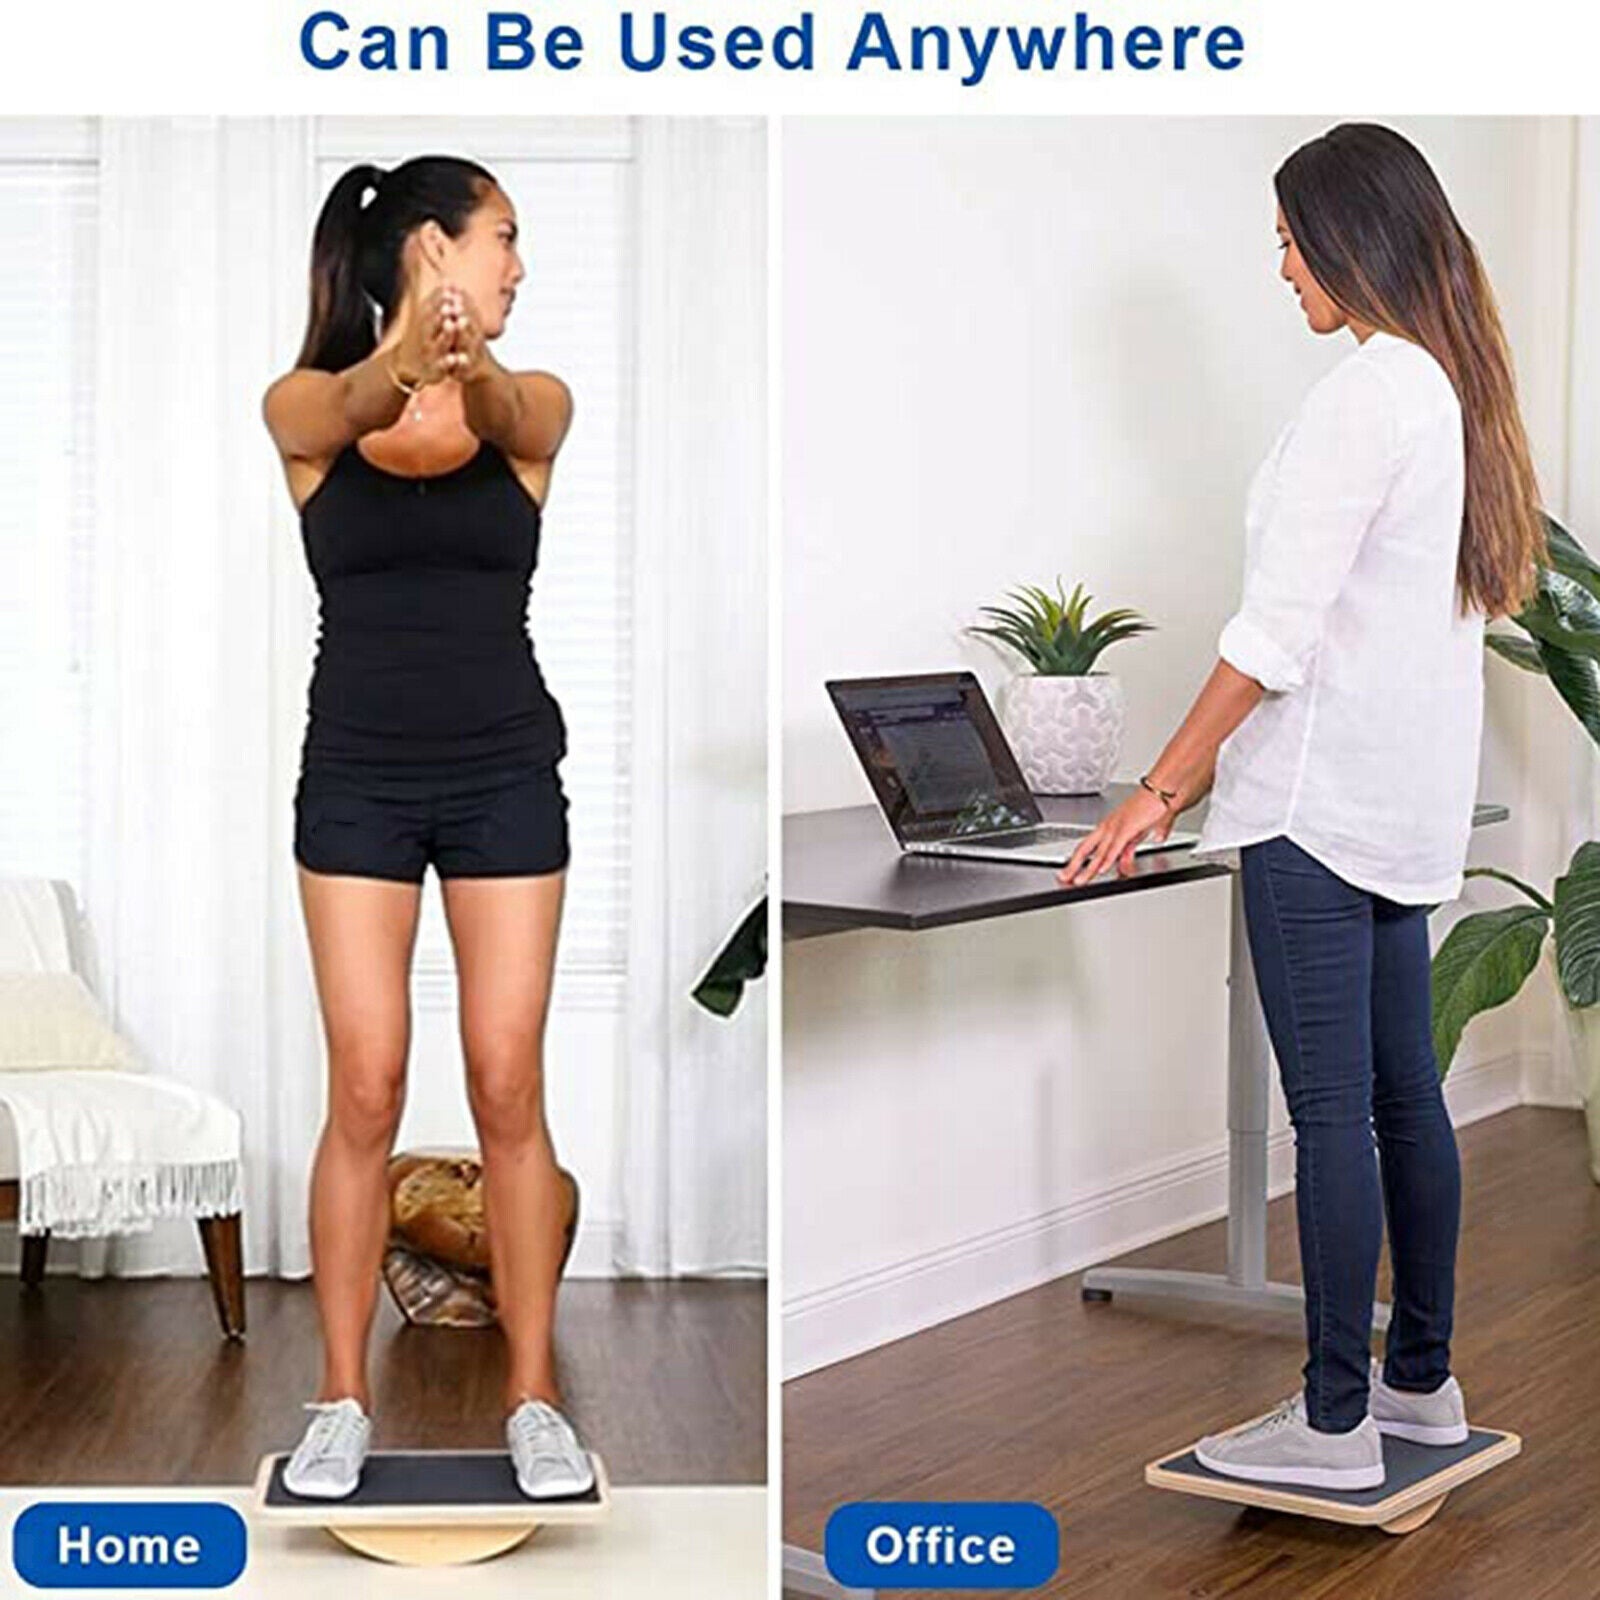 Wood Fitness Wobble Balance Board Exercise Fitness Gym Wood